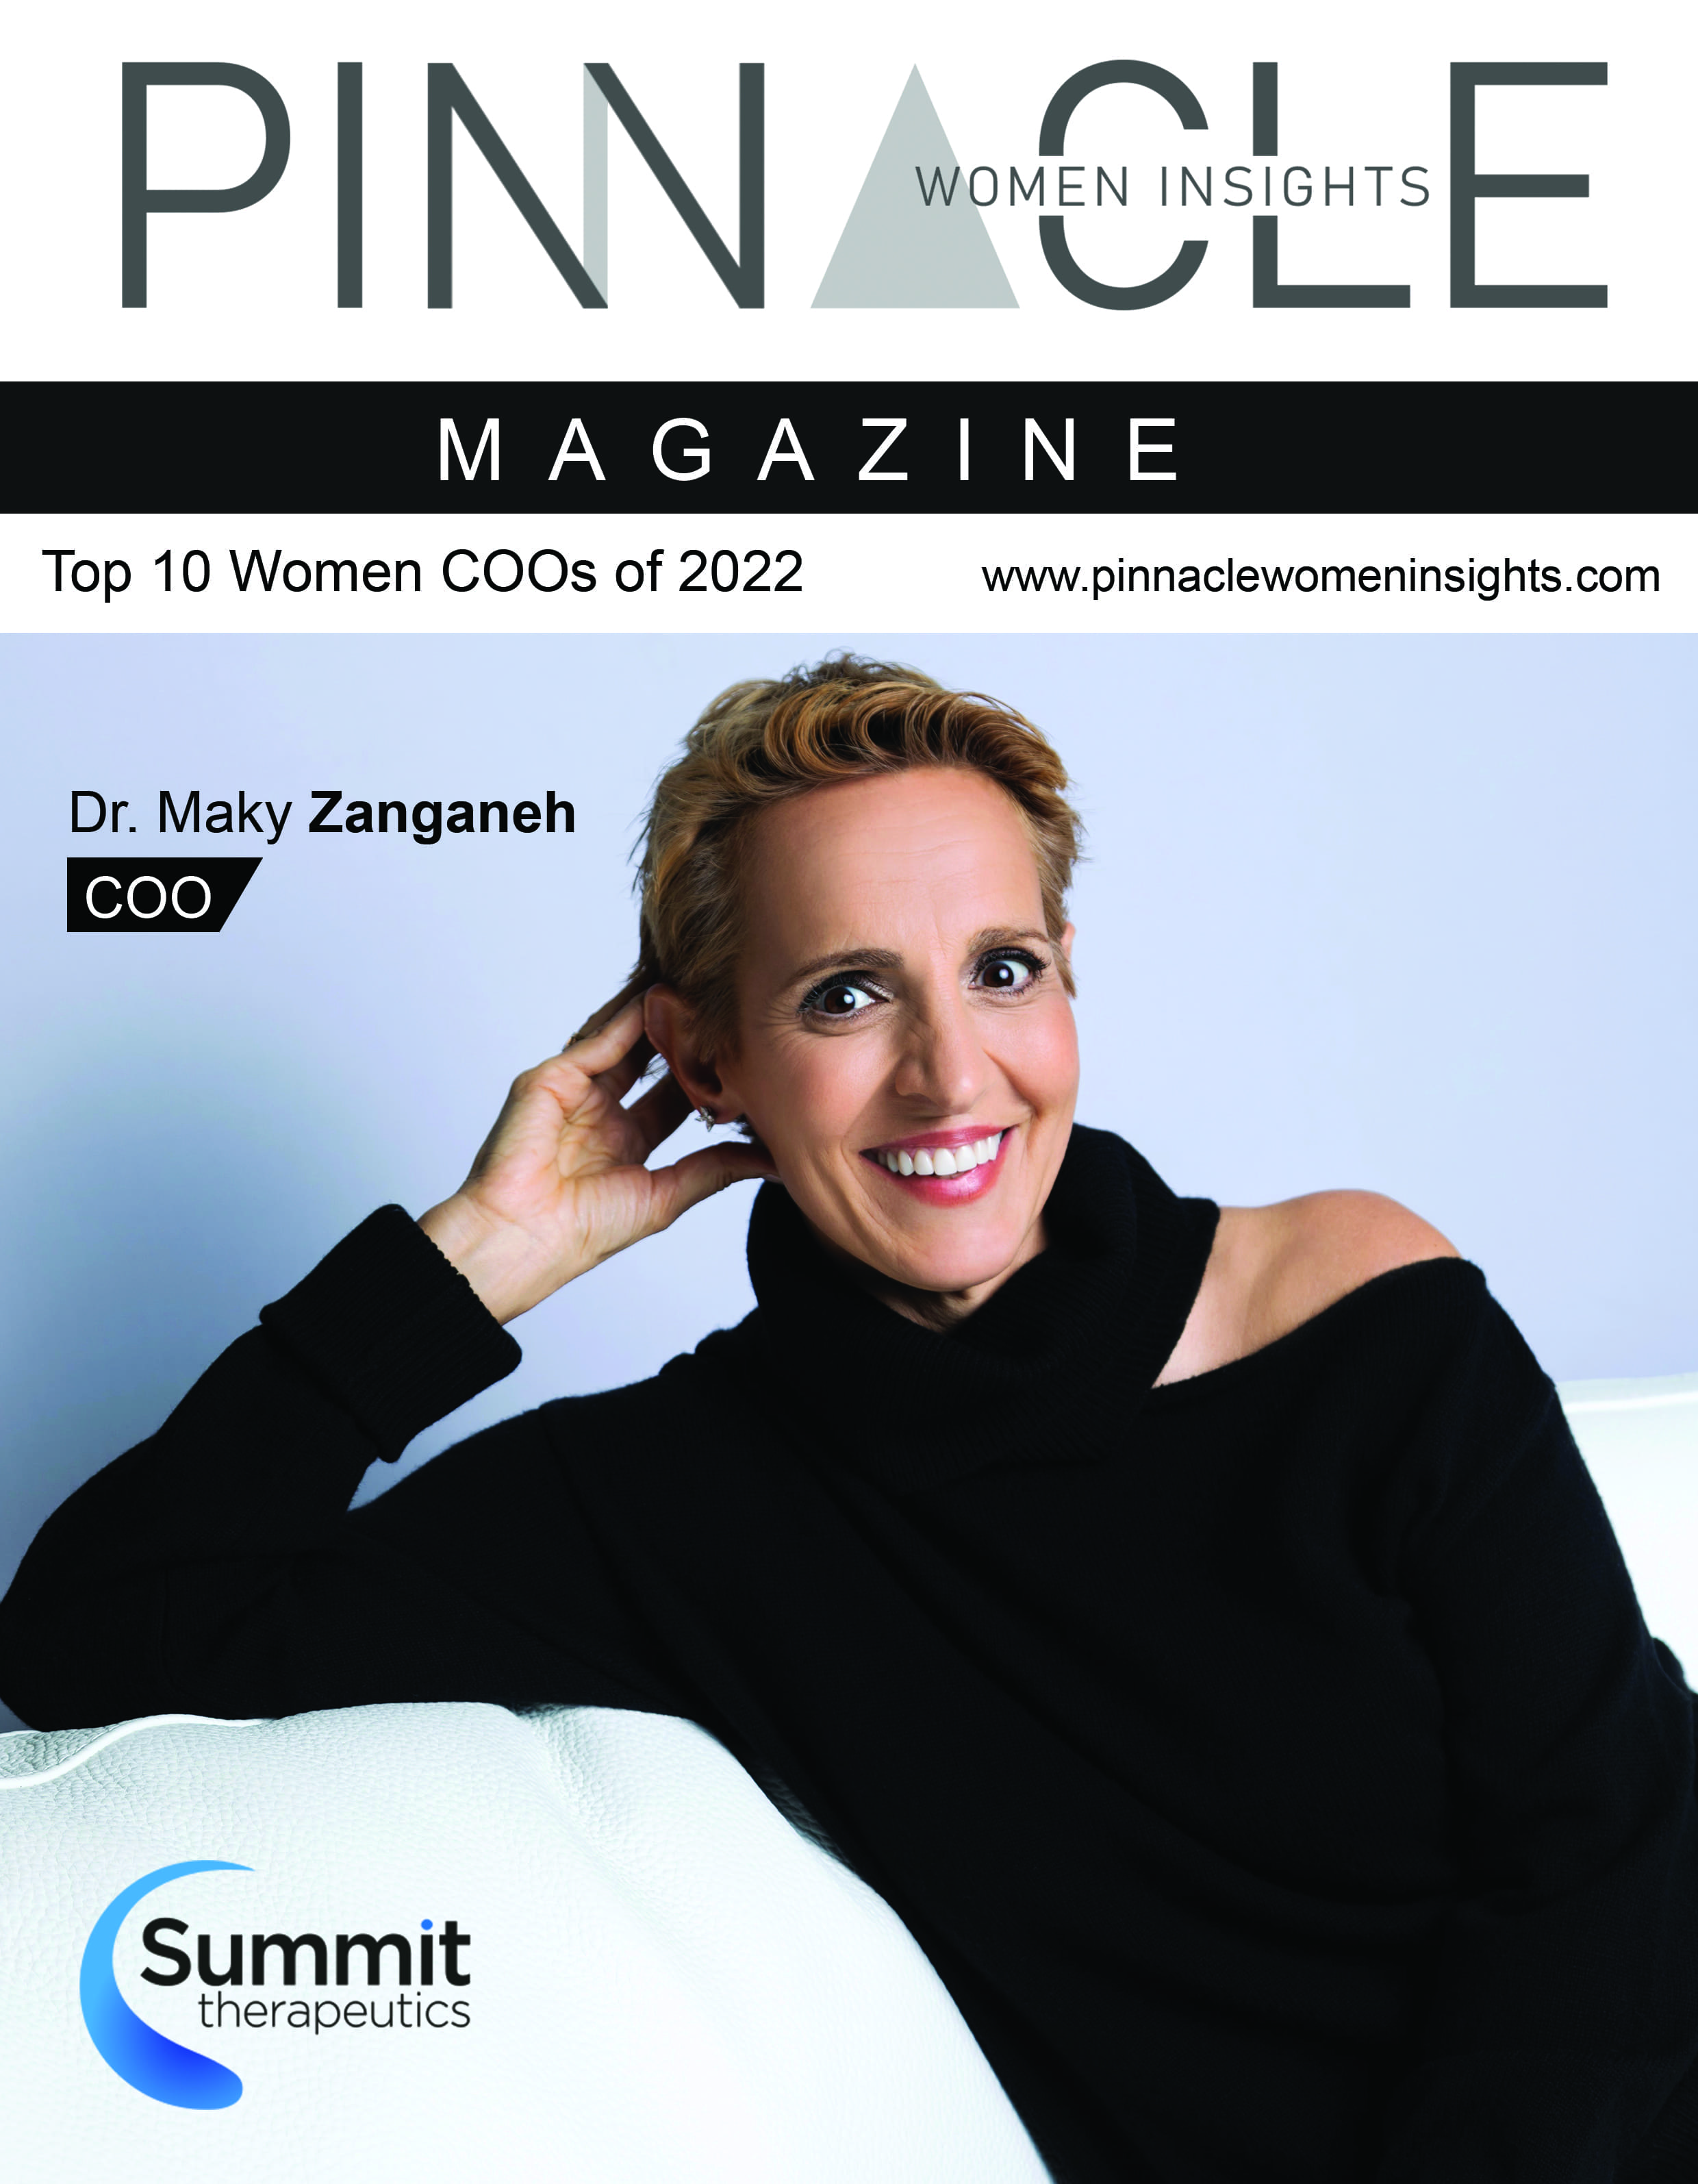 Top 10 Women COOs of 2022 front page